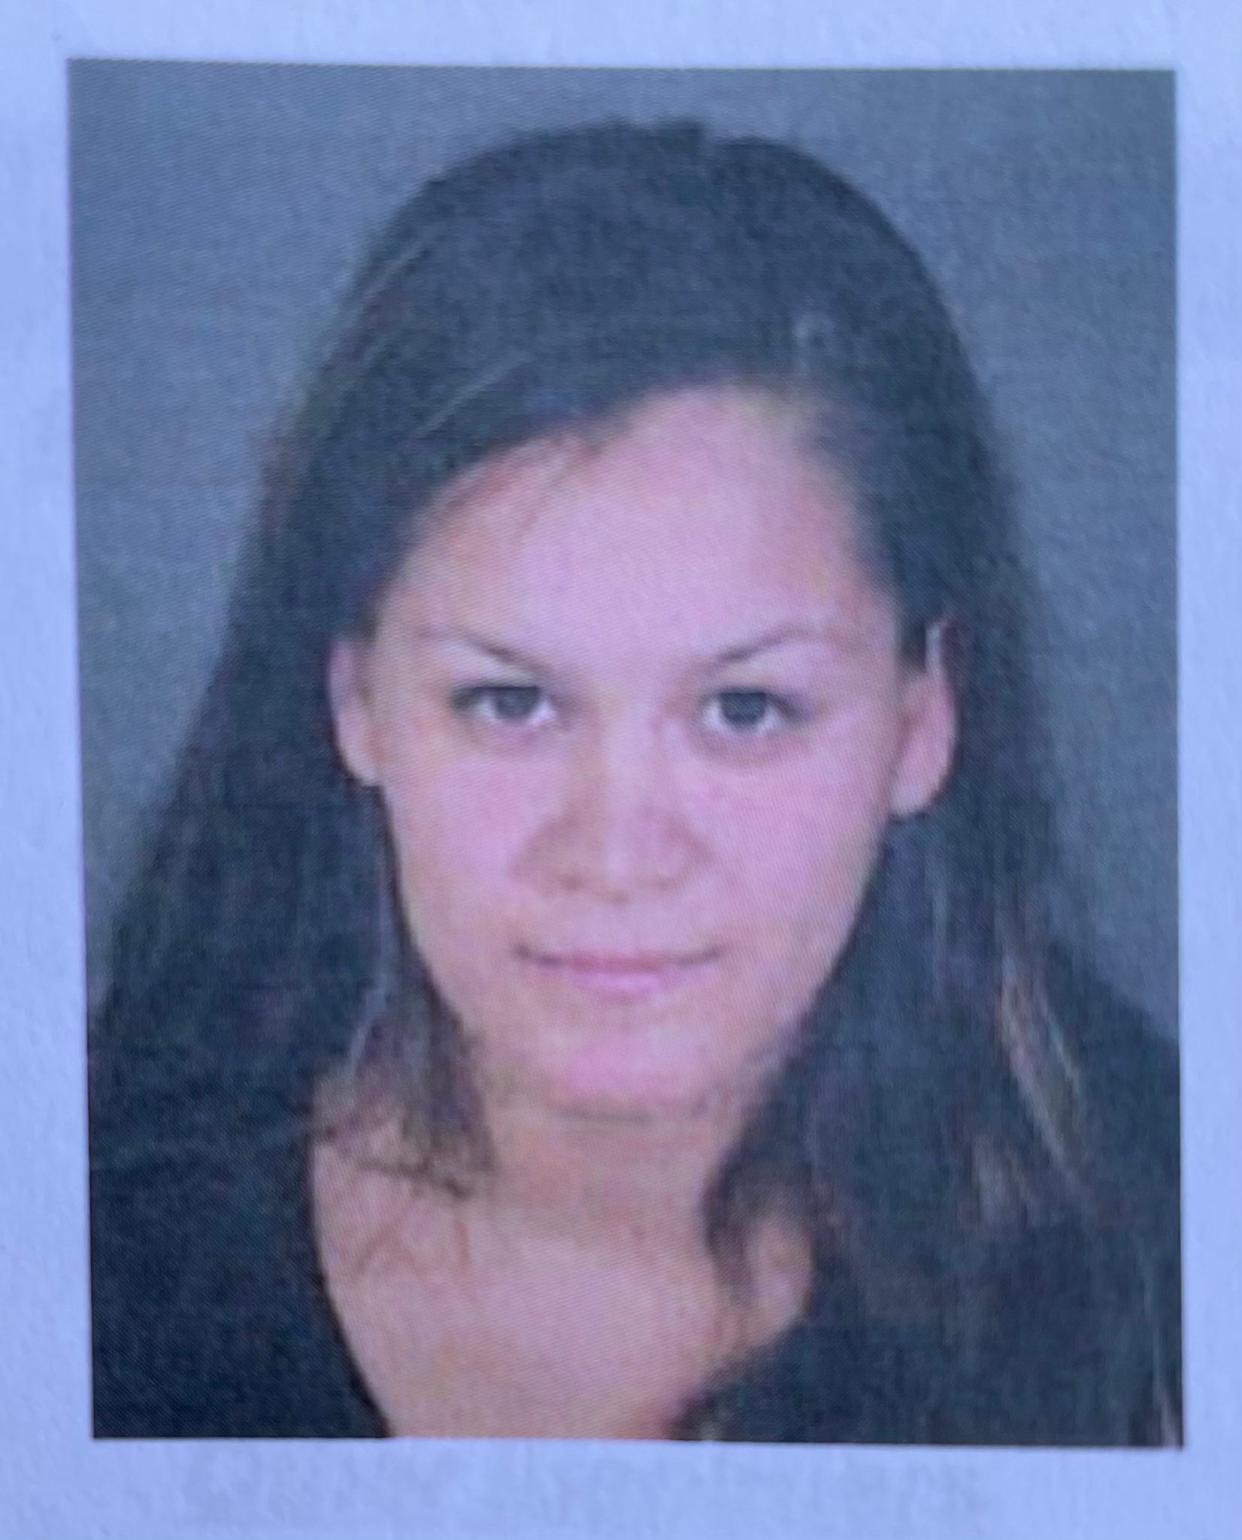 Liliana Carrillo is accused of killing her three young children (LAPD)